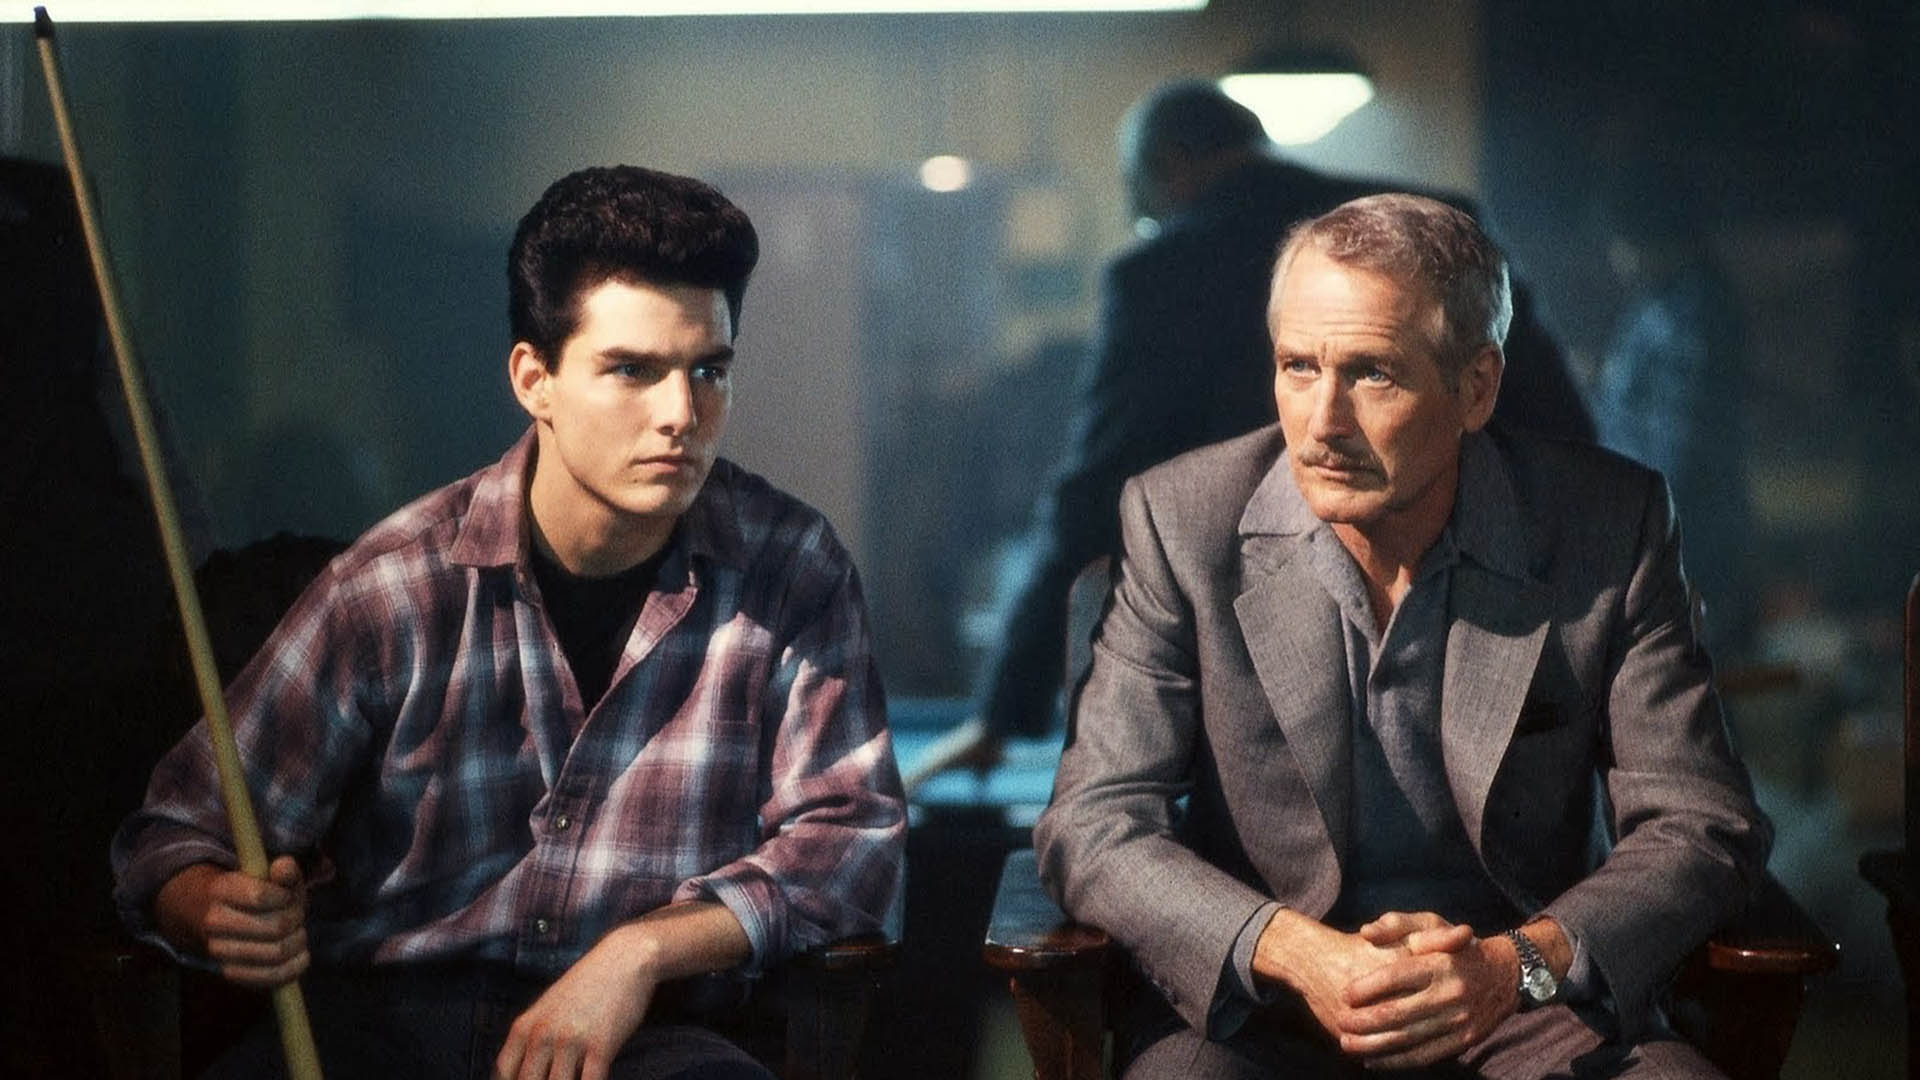 Paul Newman and Tom Cruise in The Color of Money